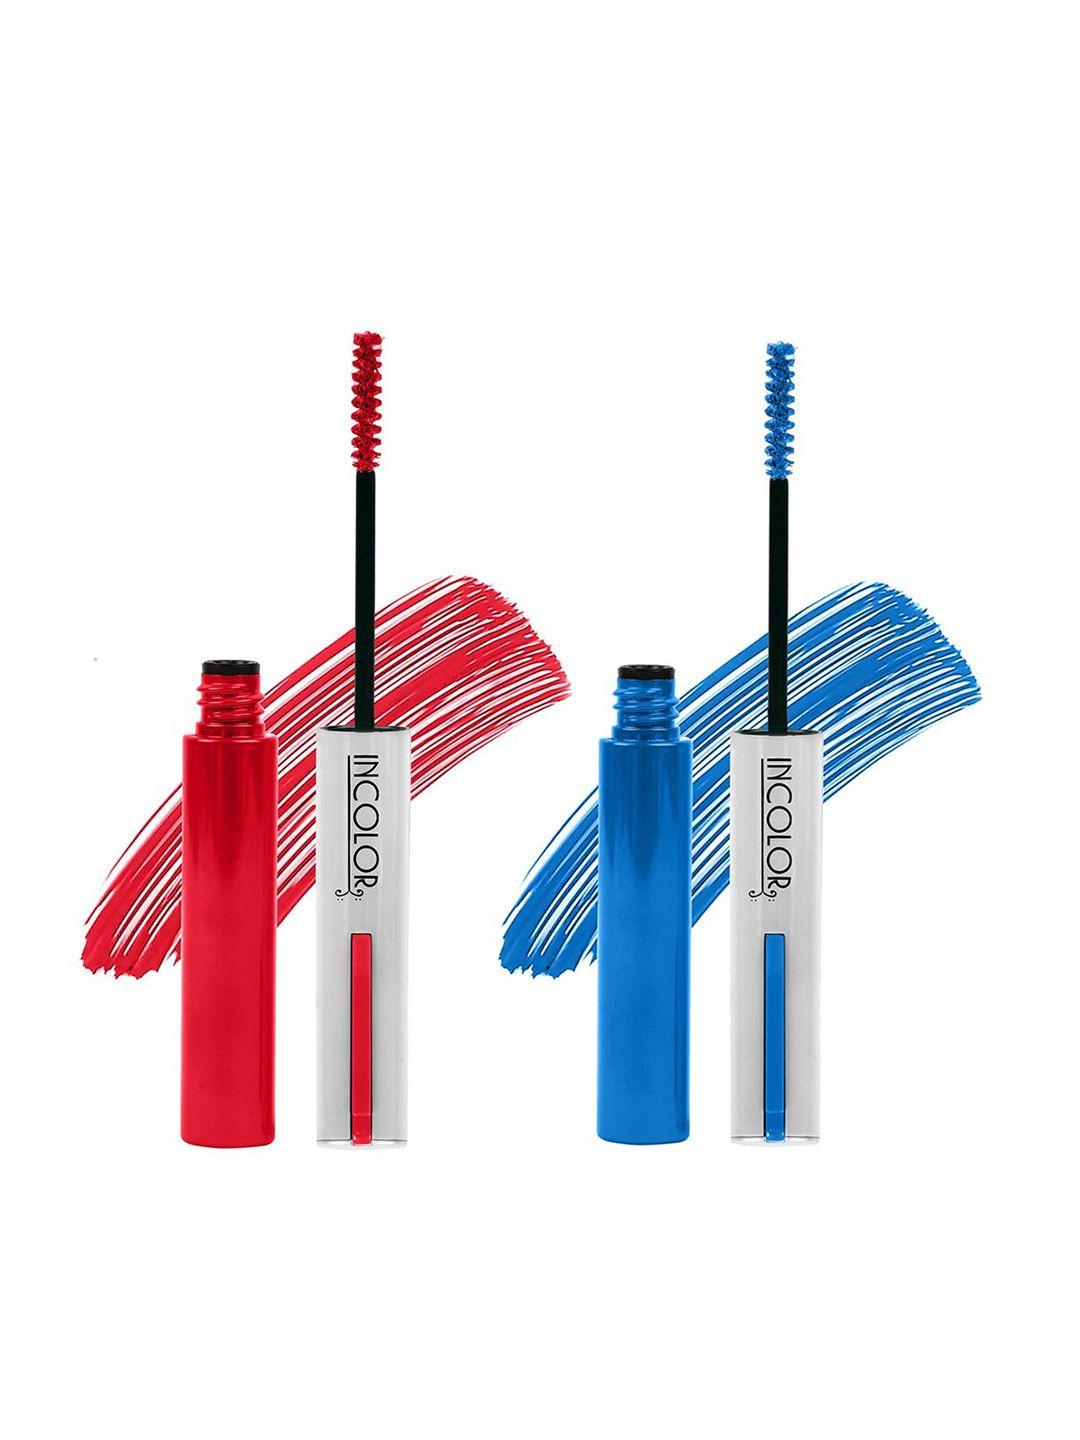 incolor-set-of-2-light-weight-color-mascara-6ml-each---imperial-red-05-&-blueberry-pop-03